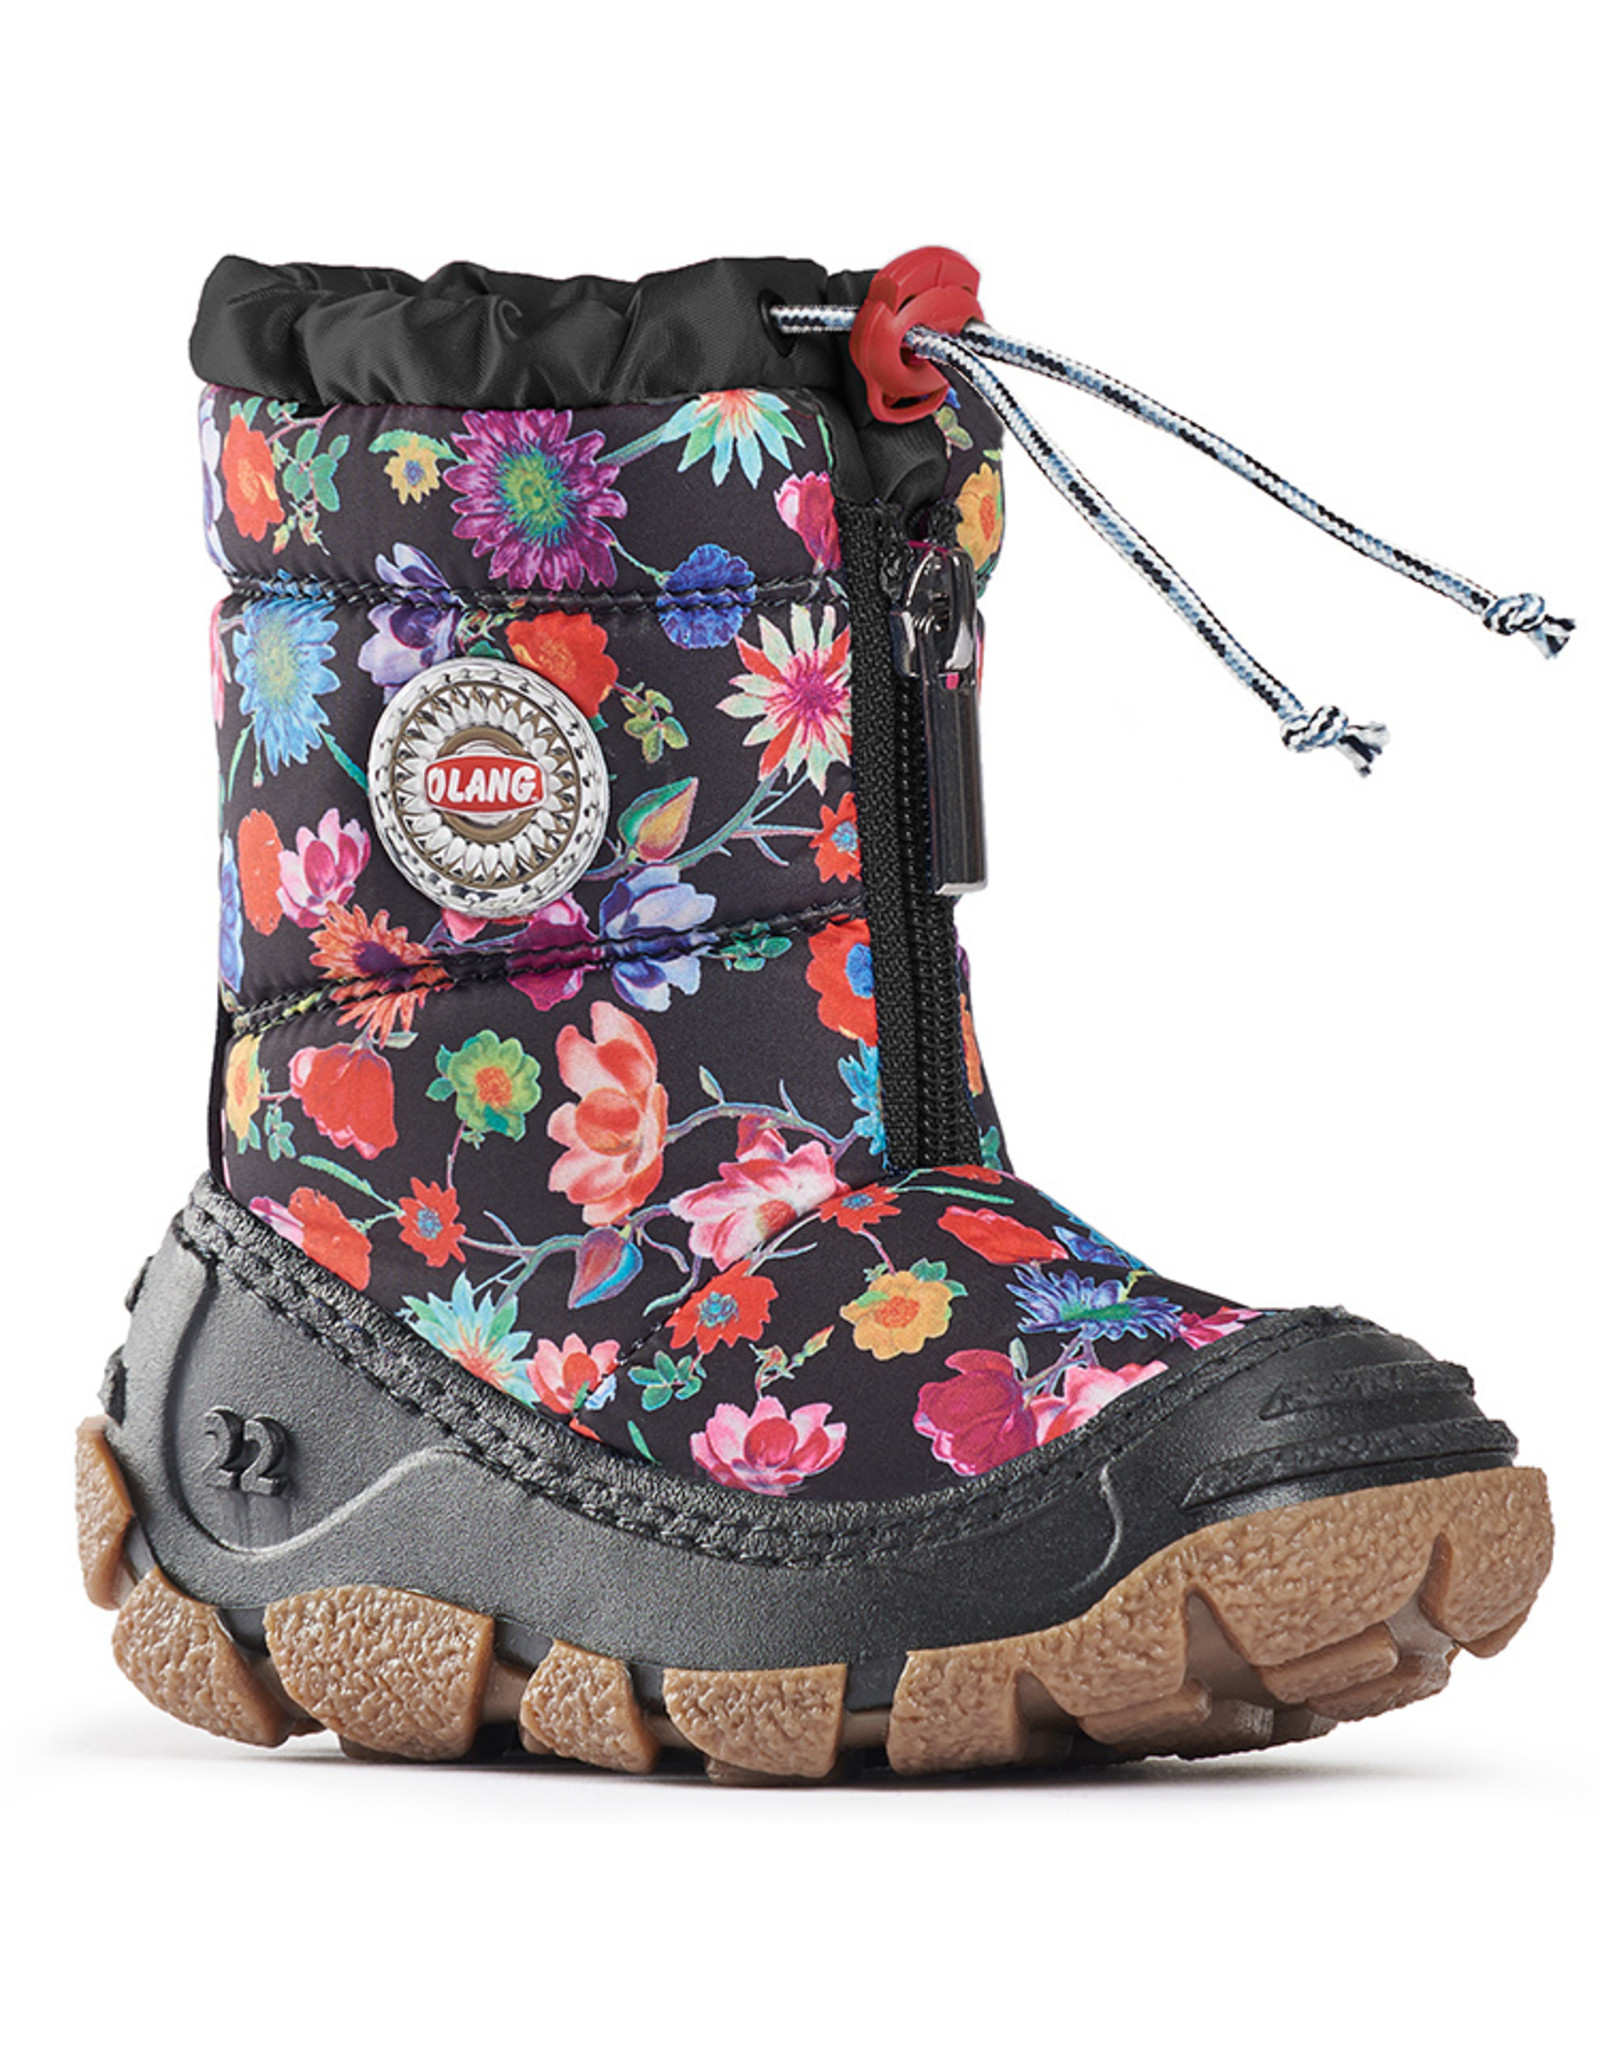 OLANG OLANG SNOW BOOTS